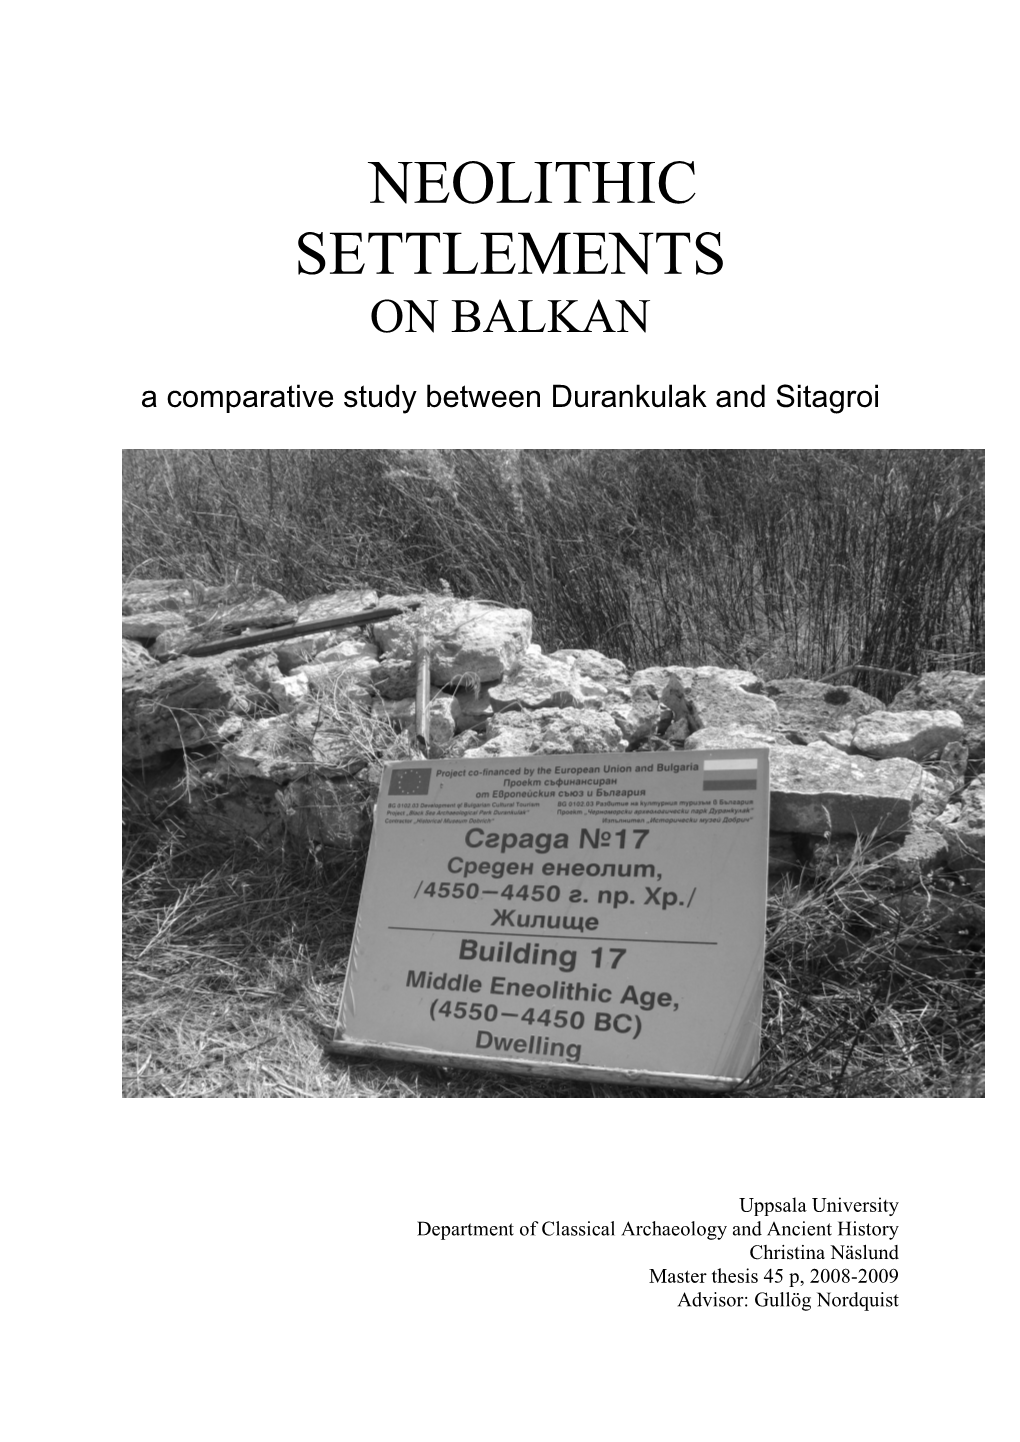 NEOLITHIC SETTLEMENTS on BALKAN a Comparative Study Between Durankulak and Sitagroi